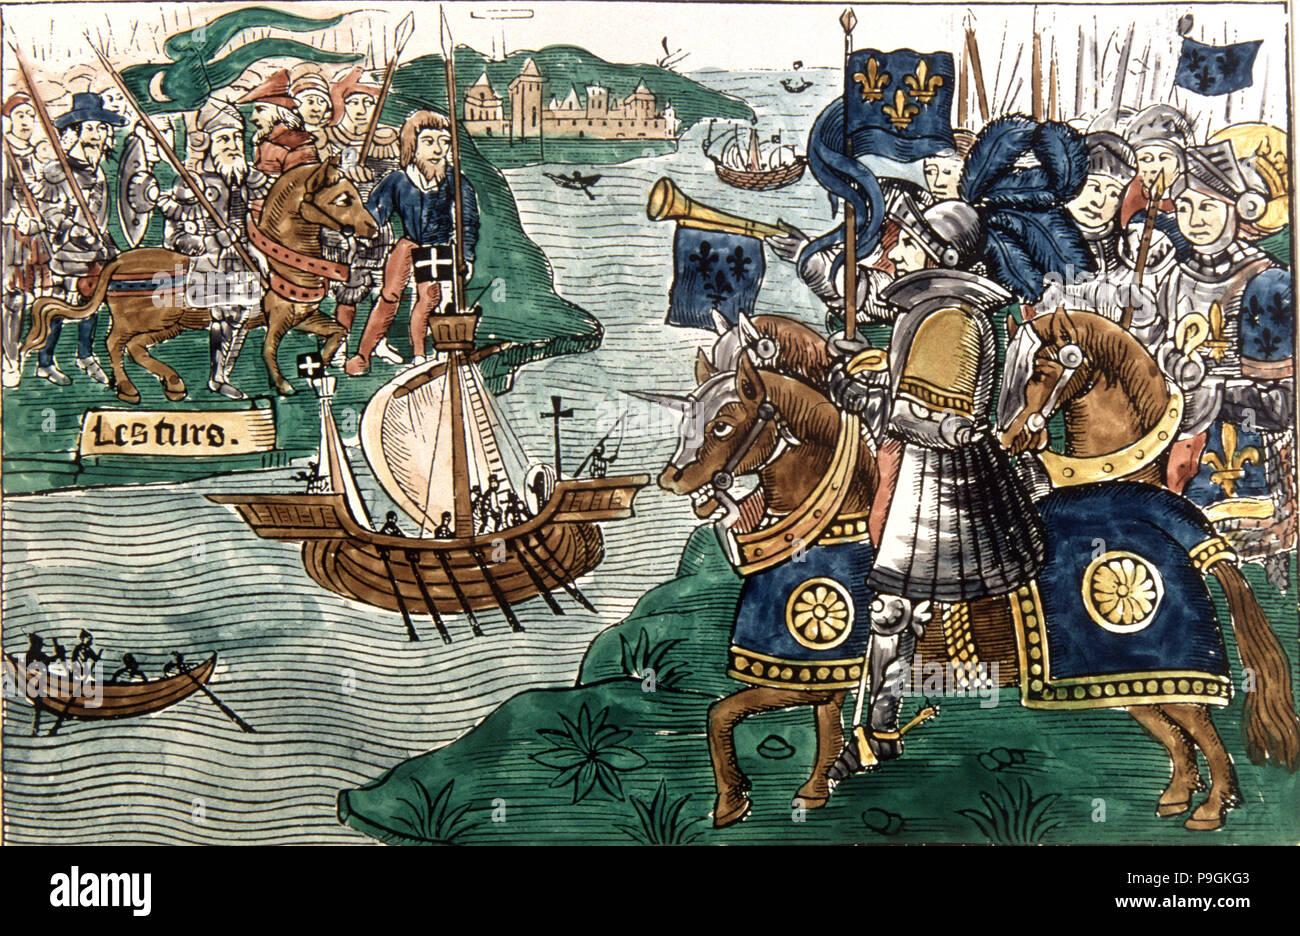 King Louis IX in the Crusades attacking the Moors in Carthage (1270), drawing. Stock Photo